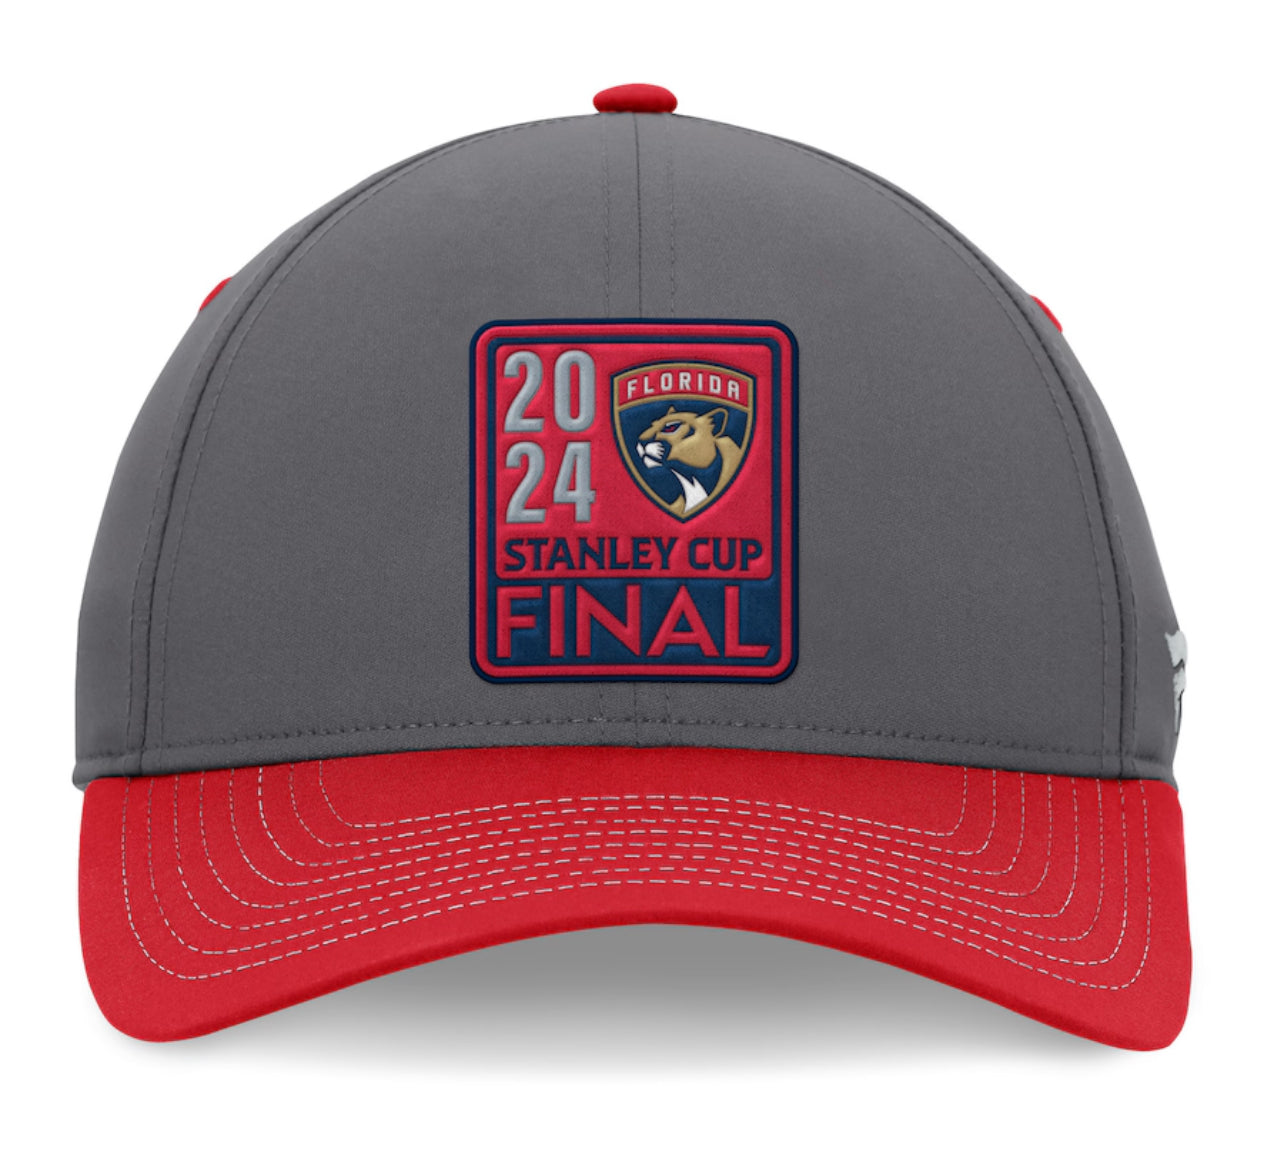 Florida Panthers 2024 Stanley Cup Final Locker Room Hat - Gray/Red